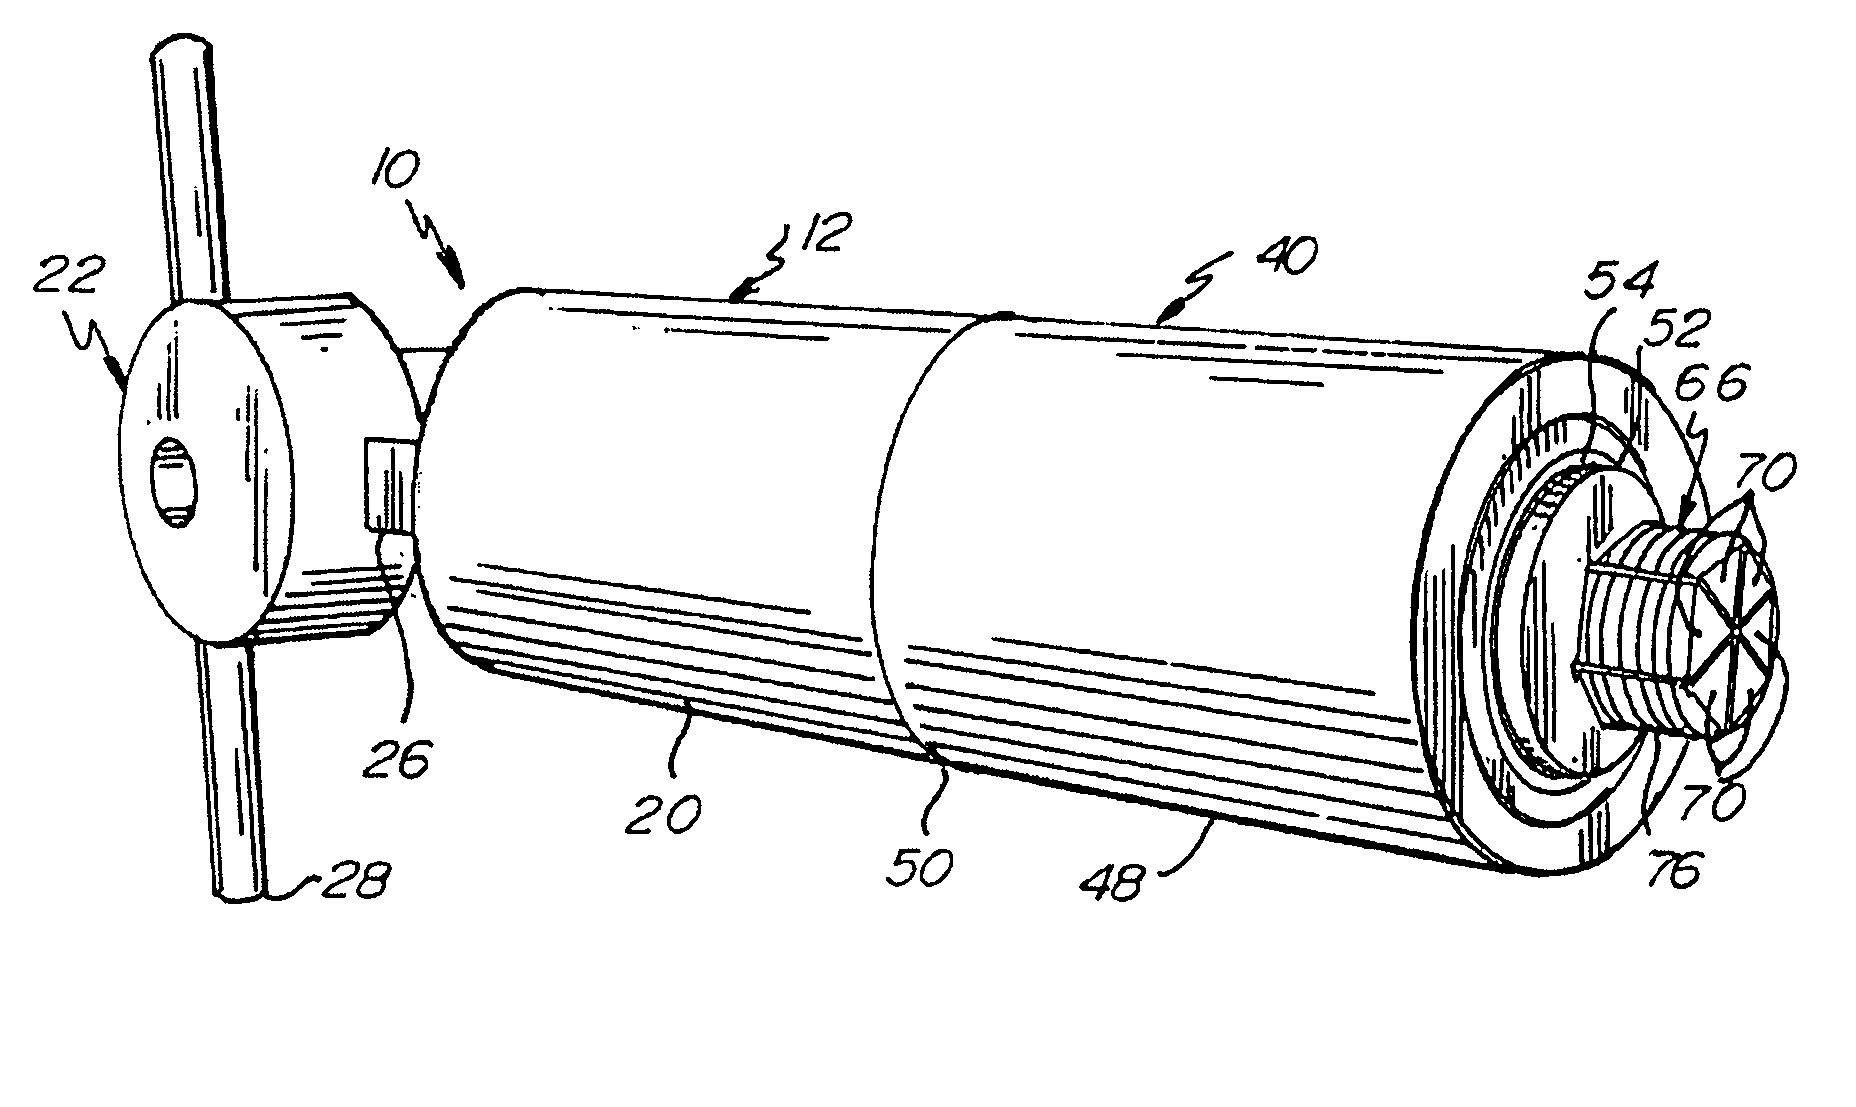 Hydrostatic testing tool and methods of use